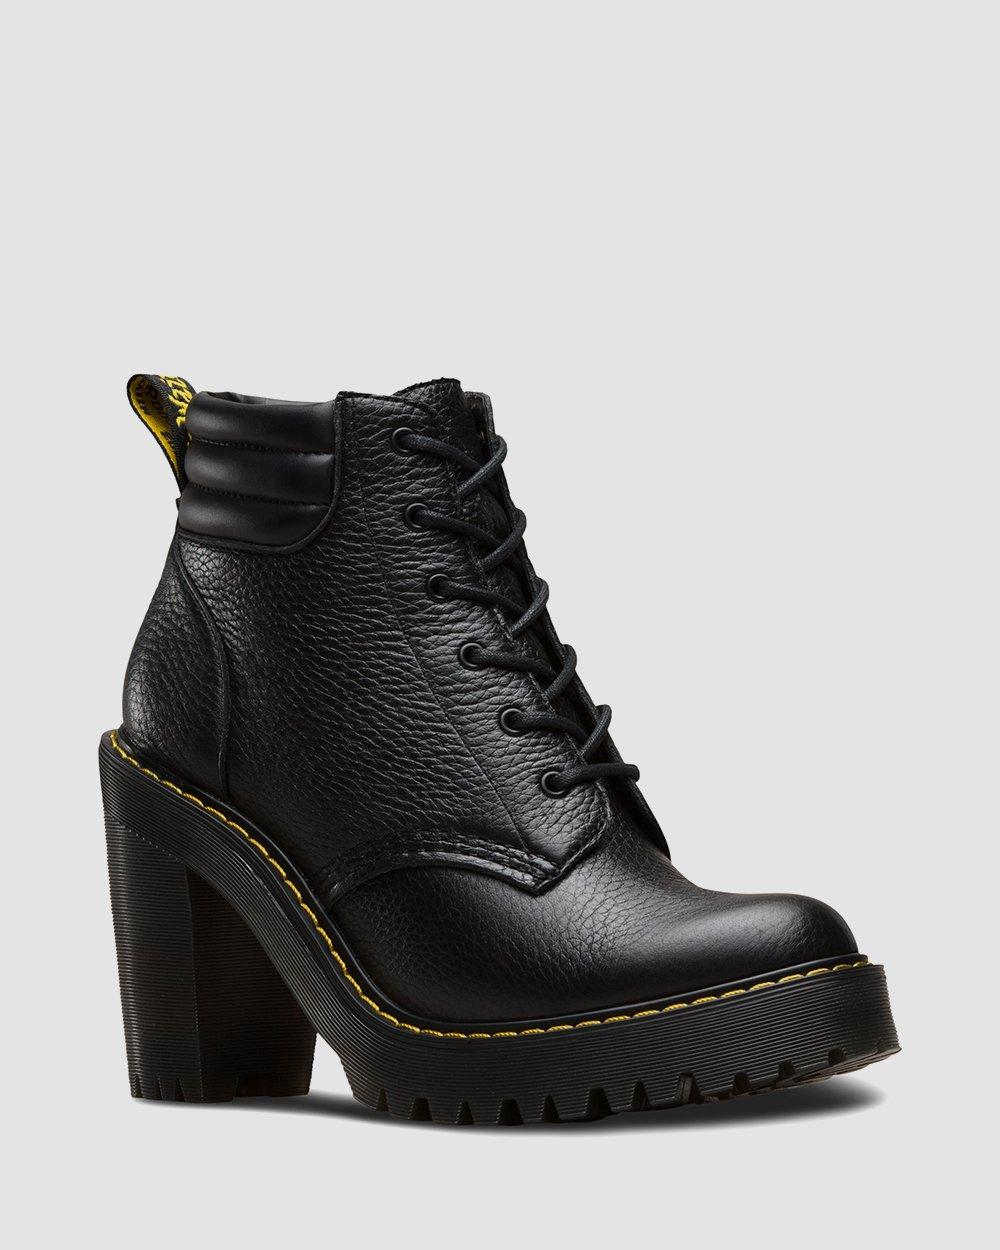 PERSEPHONE Milled Nappa | Dr. Martens UK